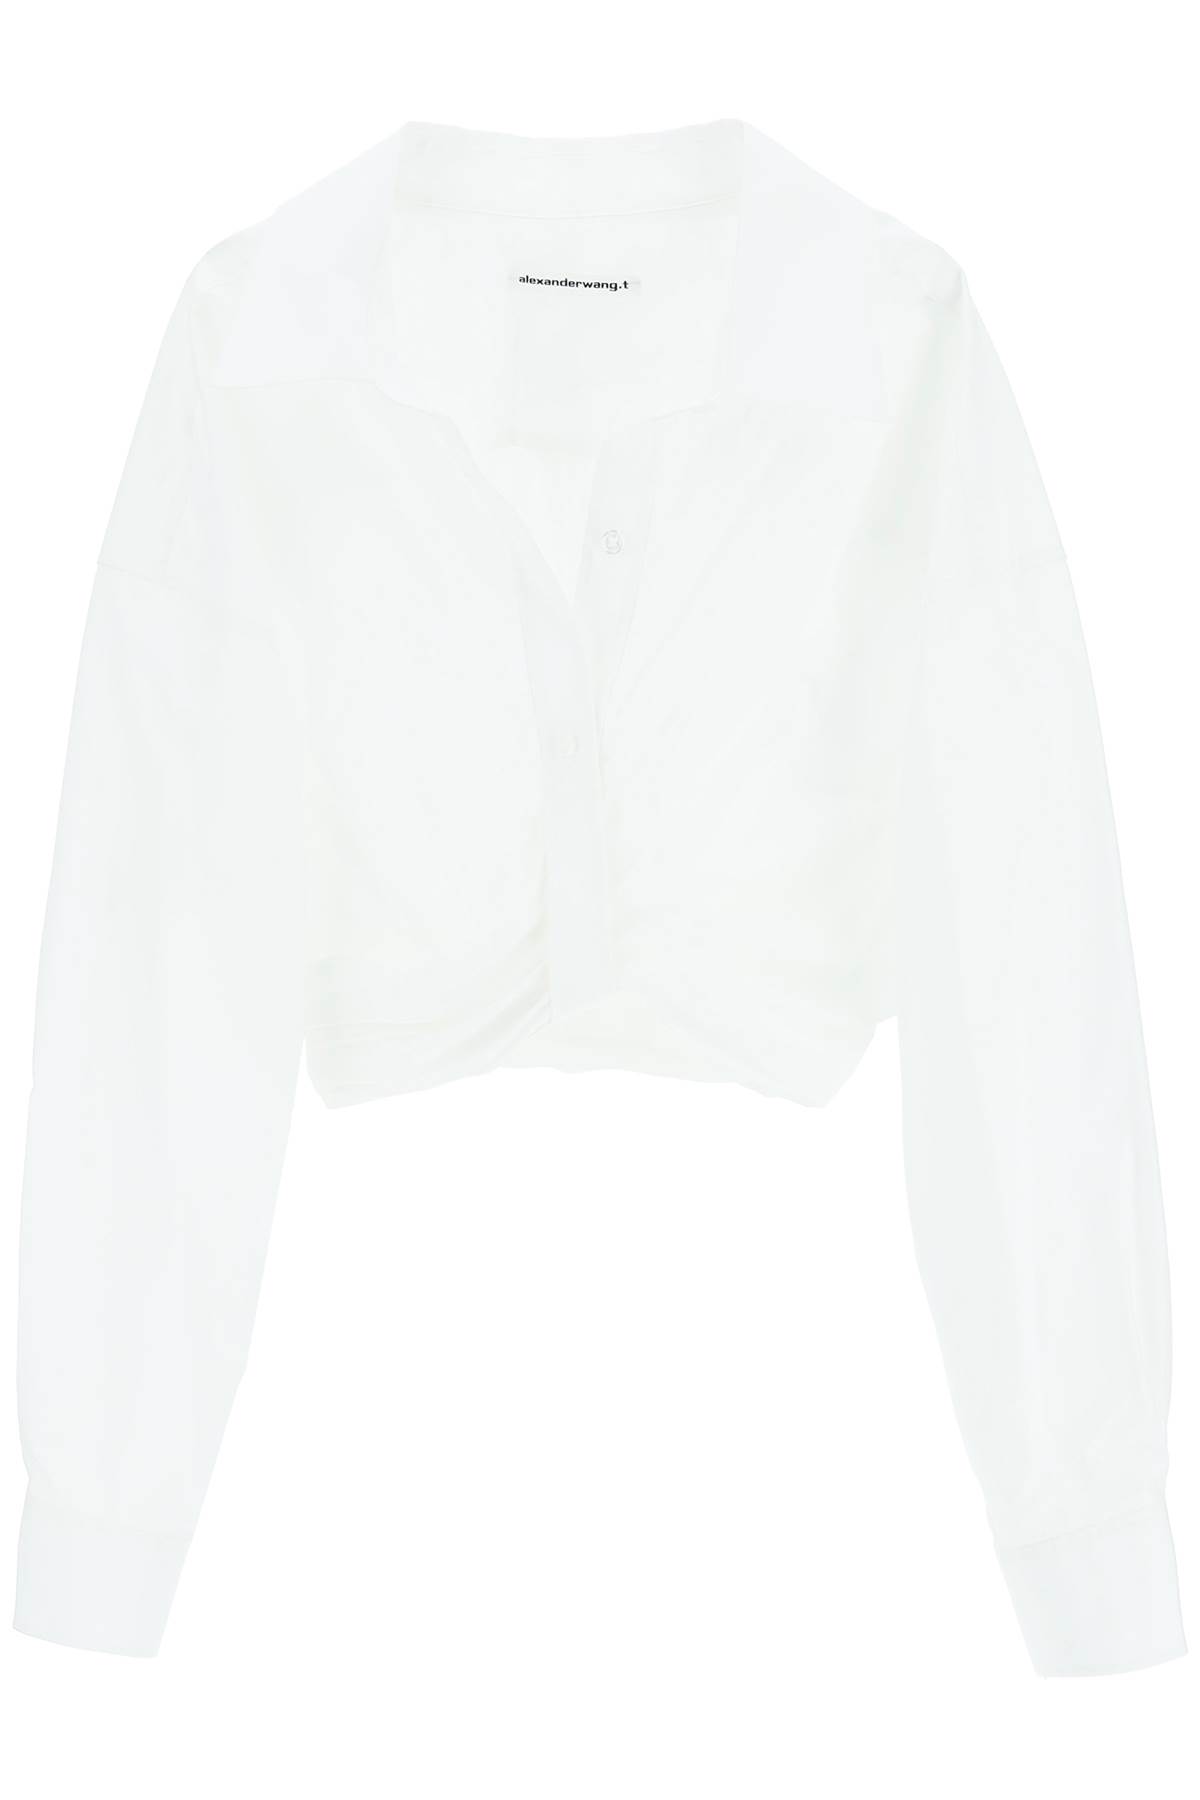 Alexander Wang Cropped Shirt With Knot Placket